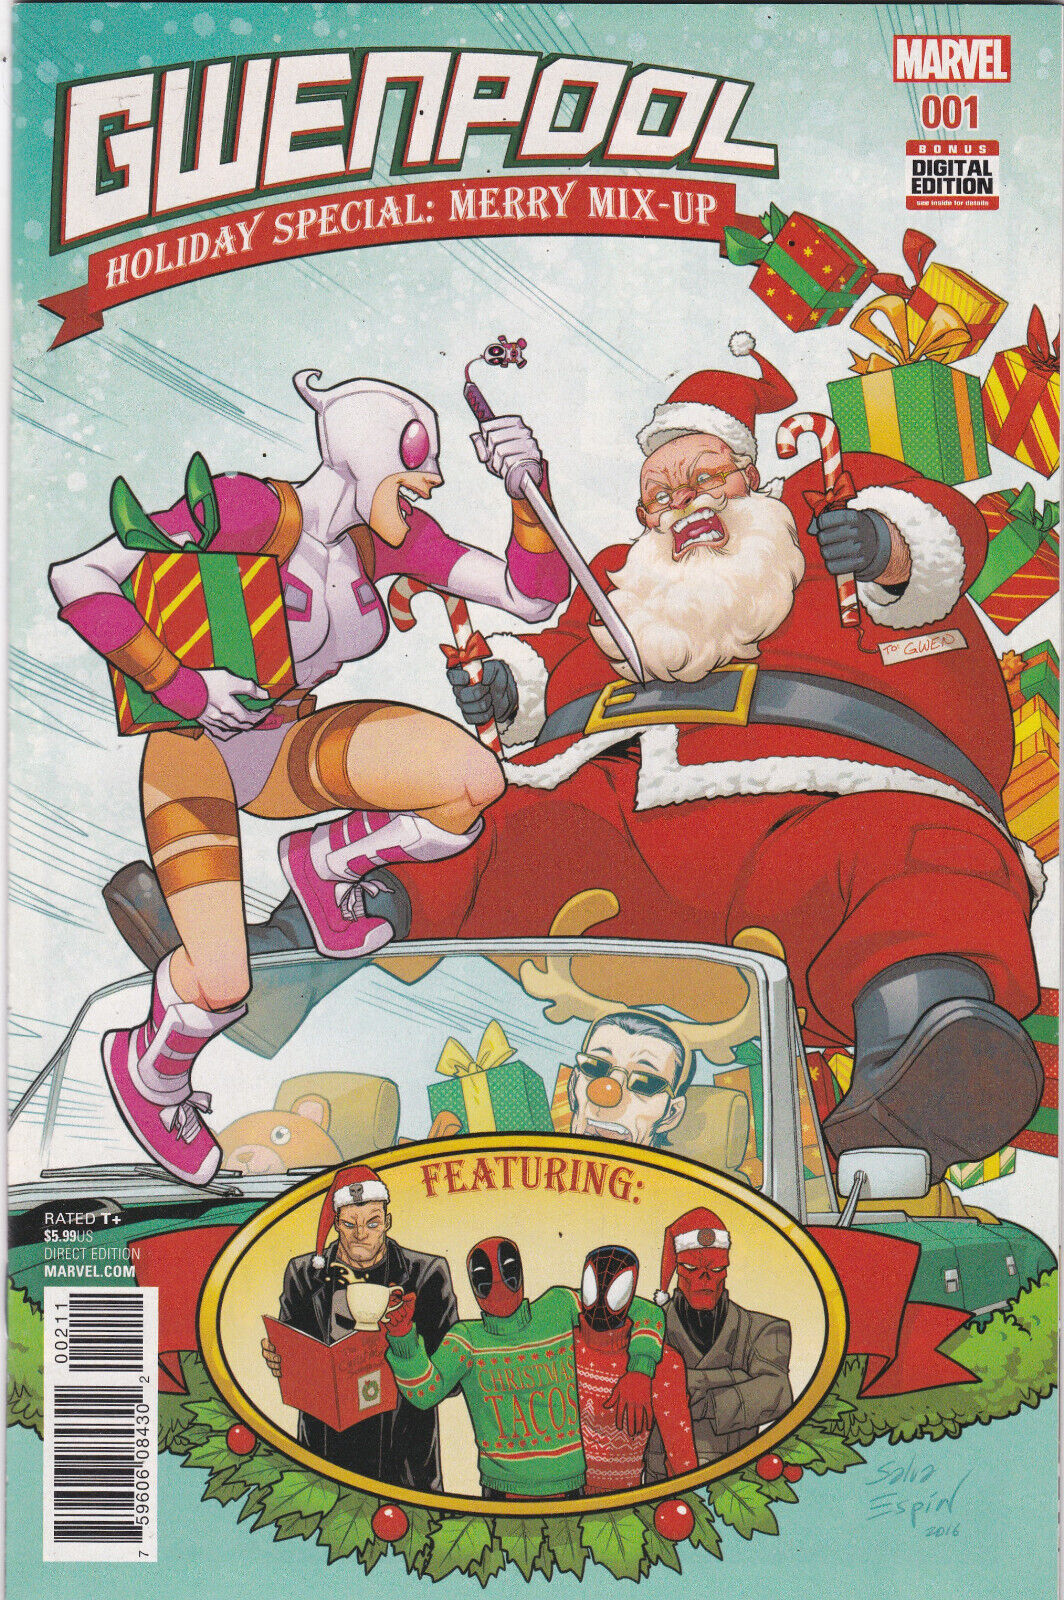 GWENPOOL HOLIDAY SPECIAL: MERRY MIX-UP # 1 * MARVEL COMICS * 2017 * HIGH GRADE